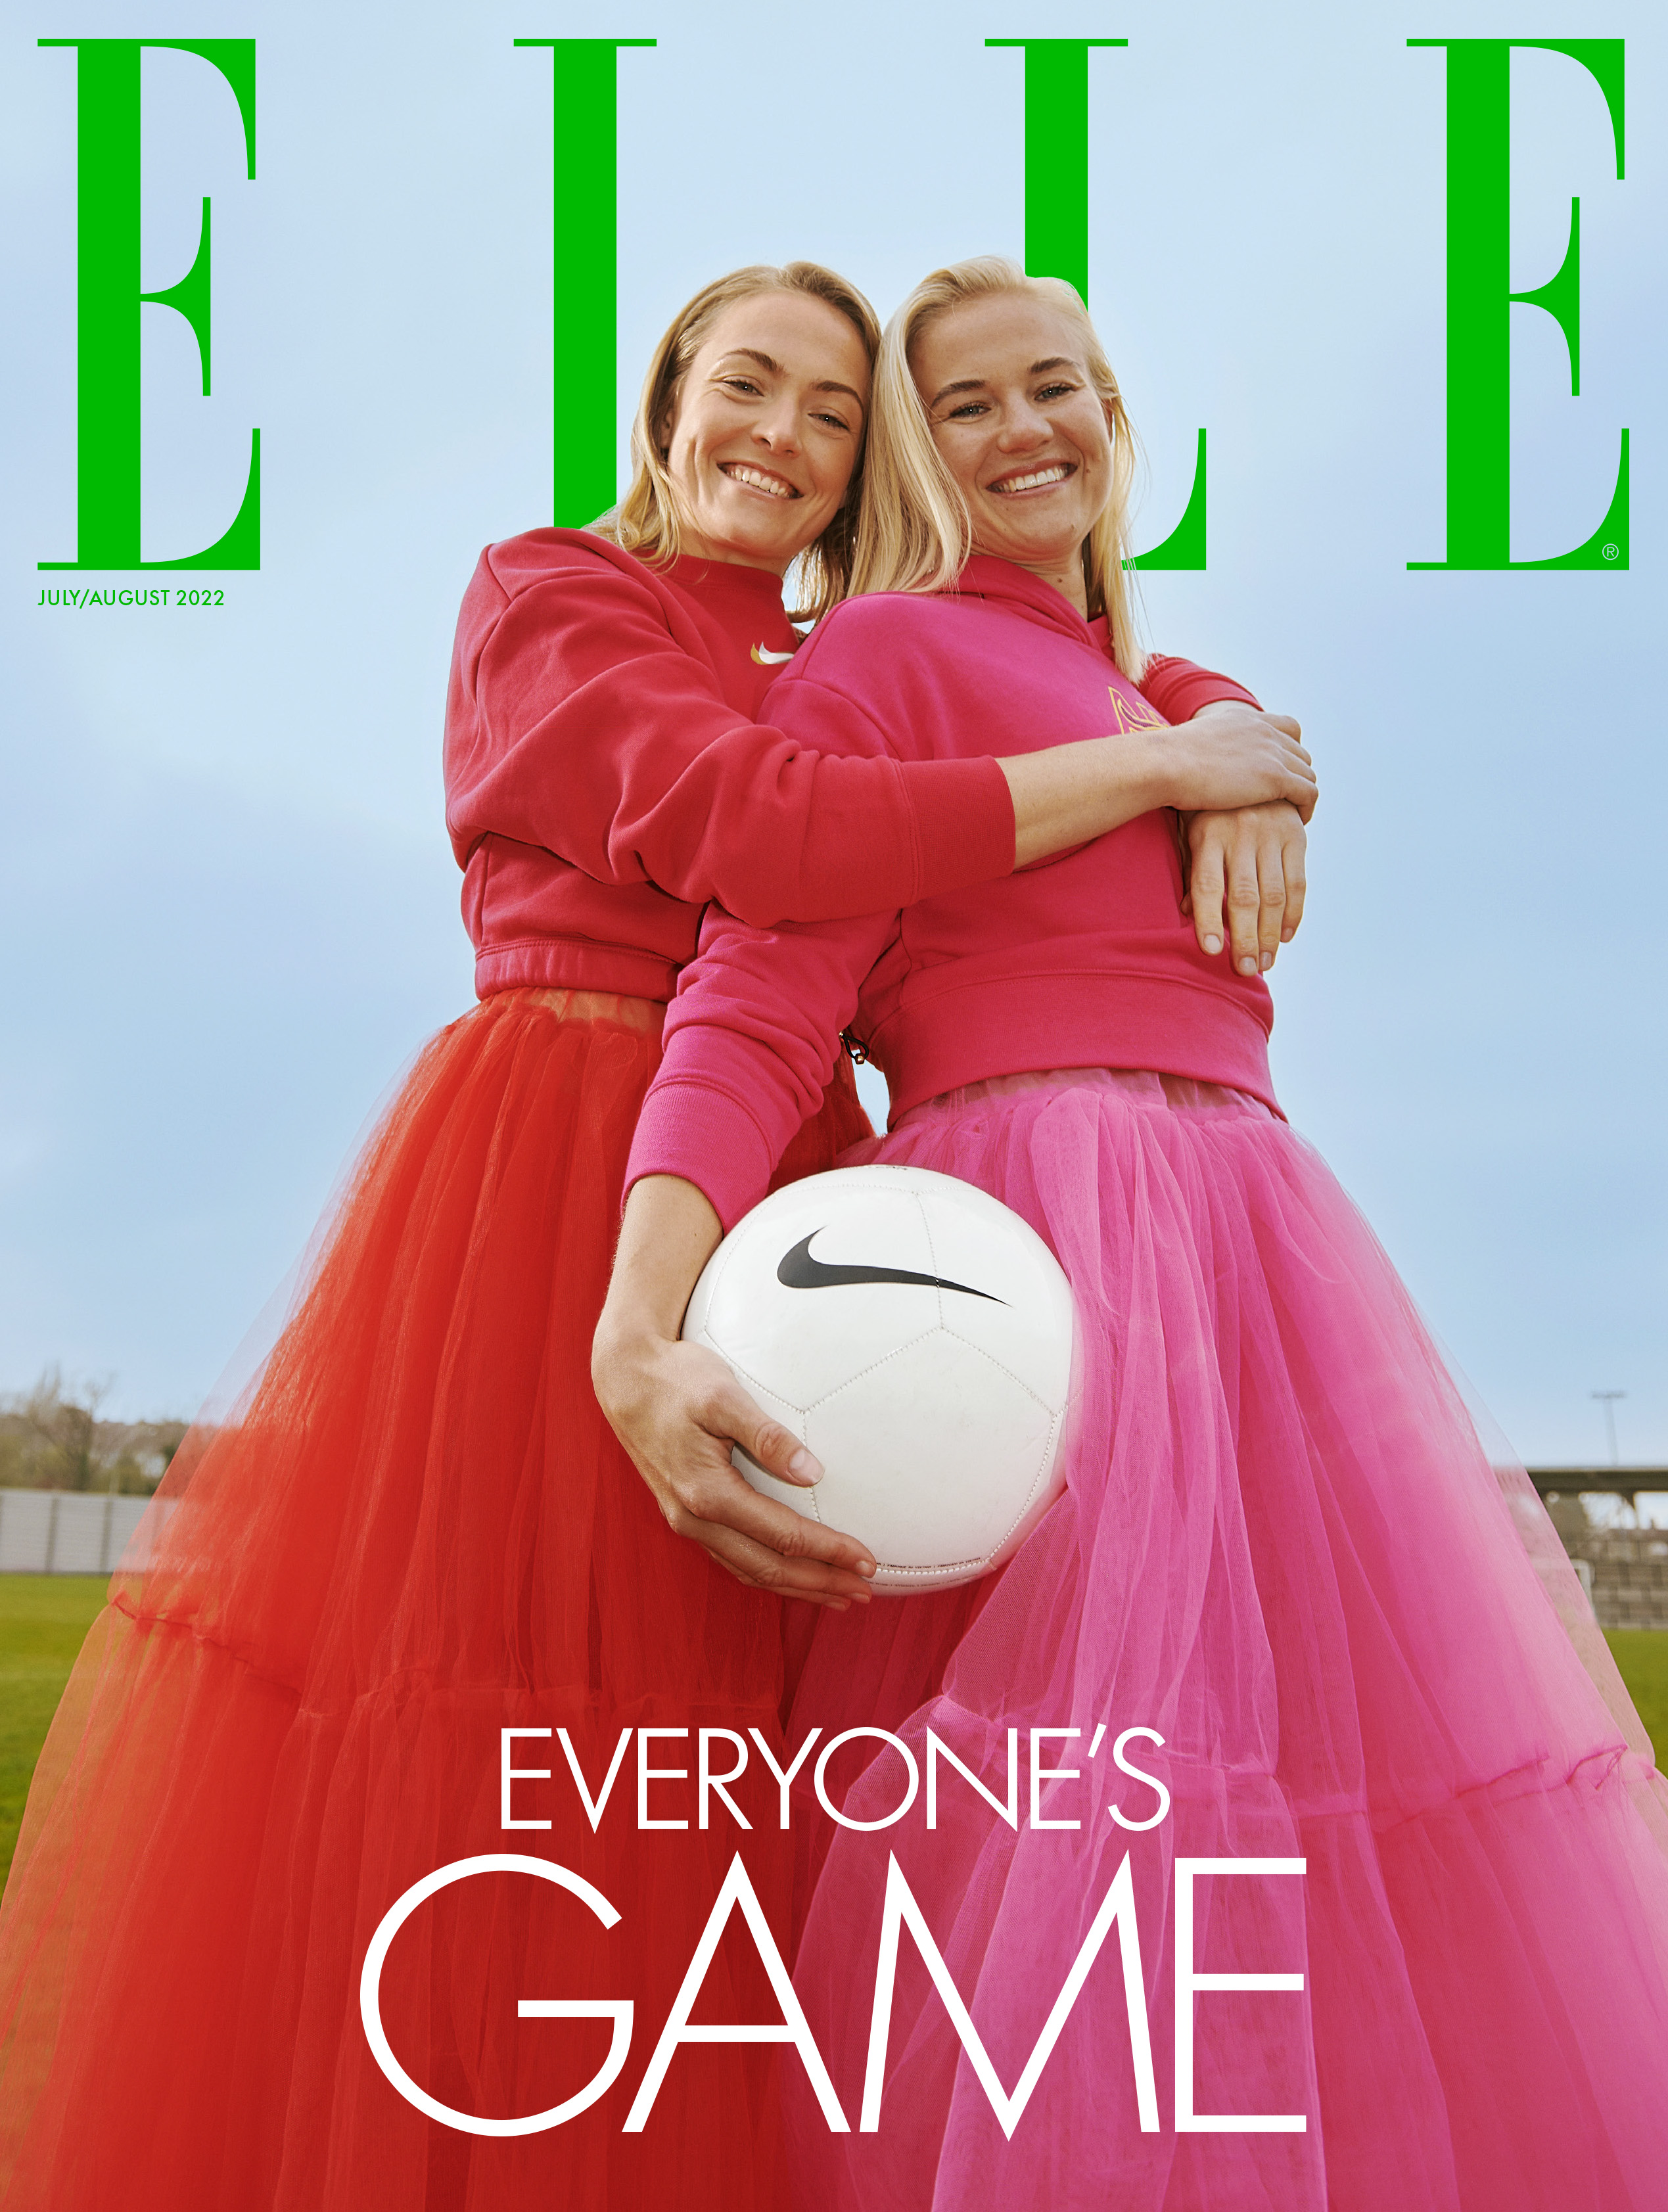 Margaret Mitchell Peticionario canto Elle UK and Nike launch Women's Euro football campaign - The Media Leader